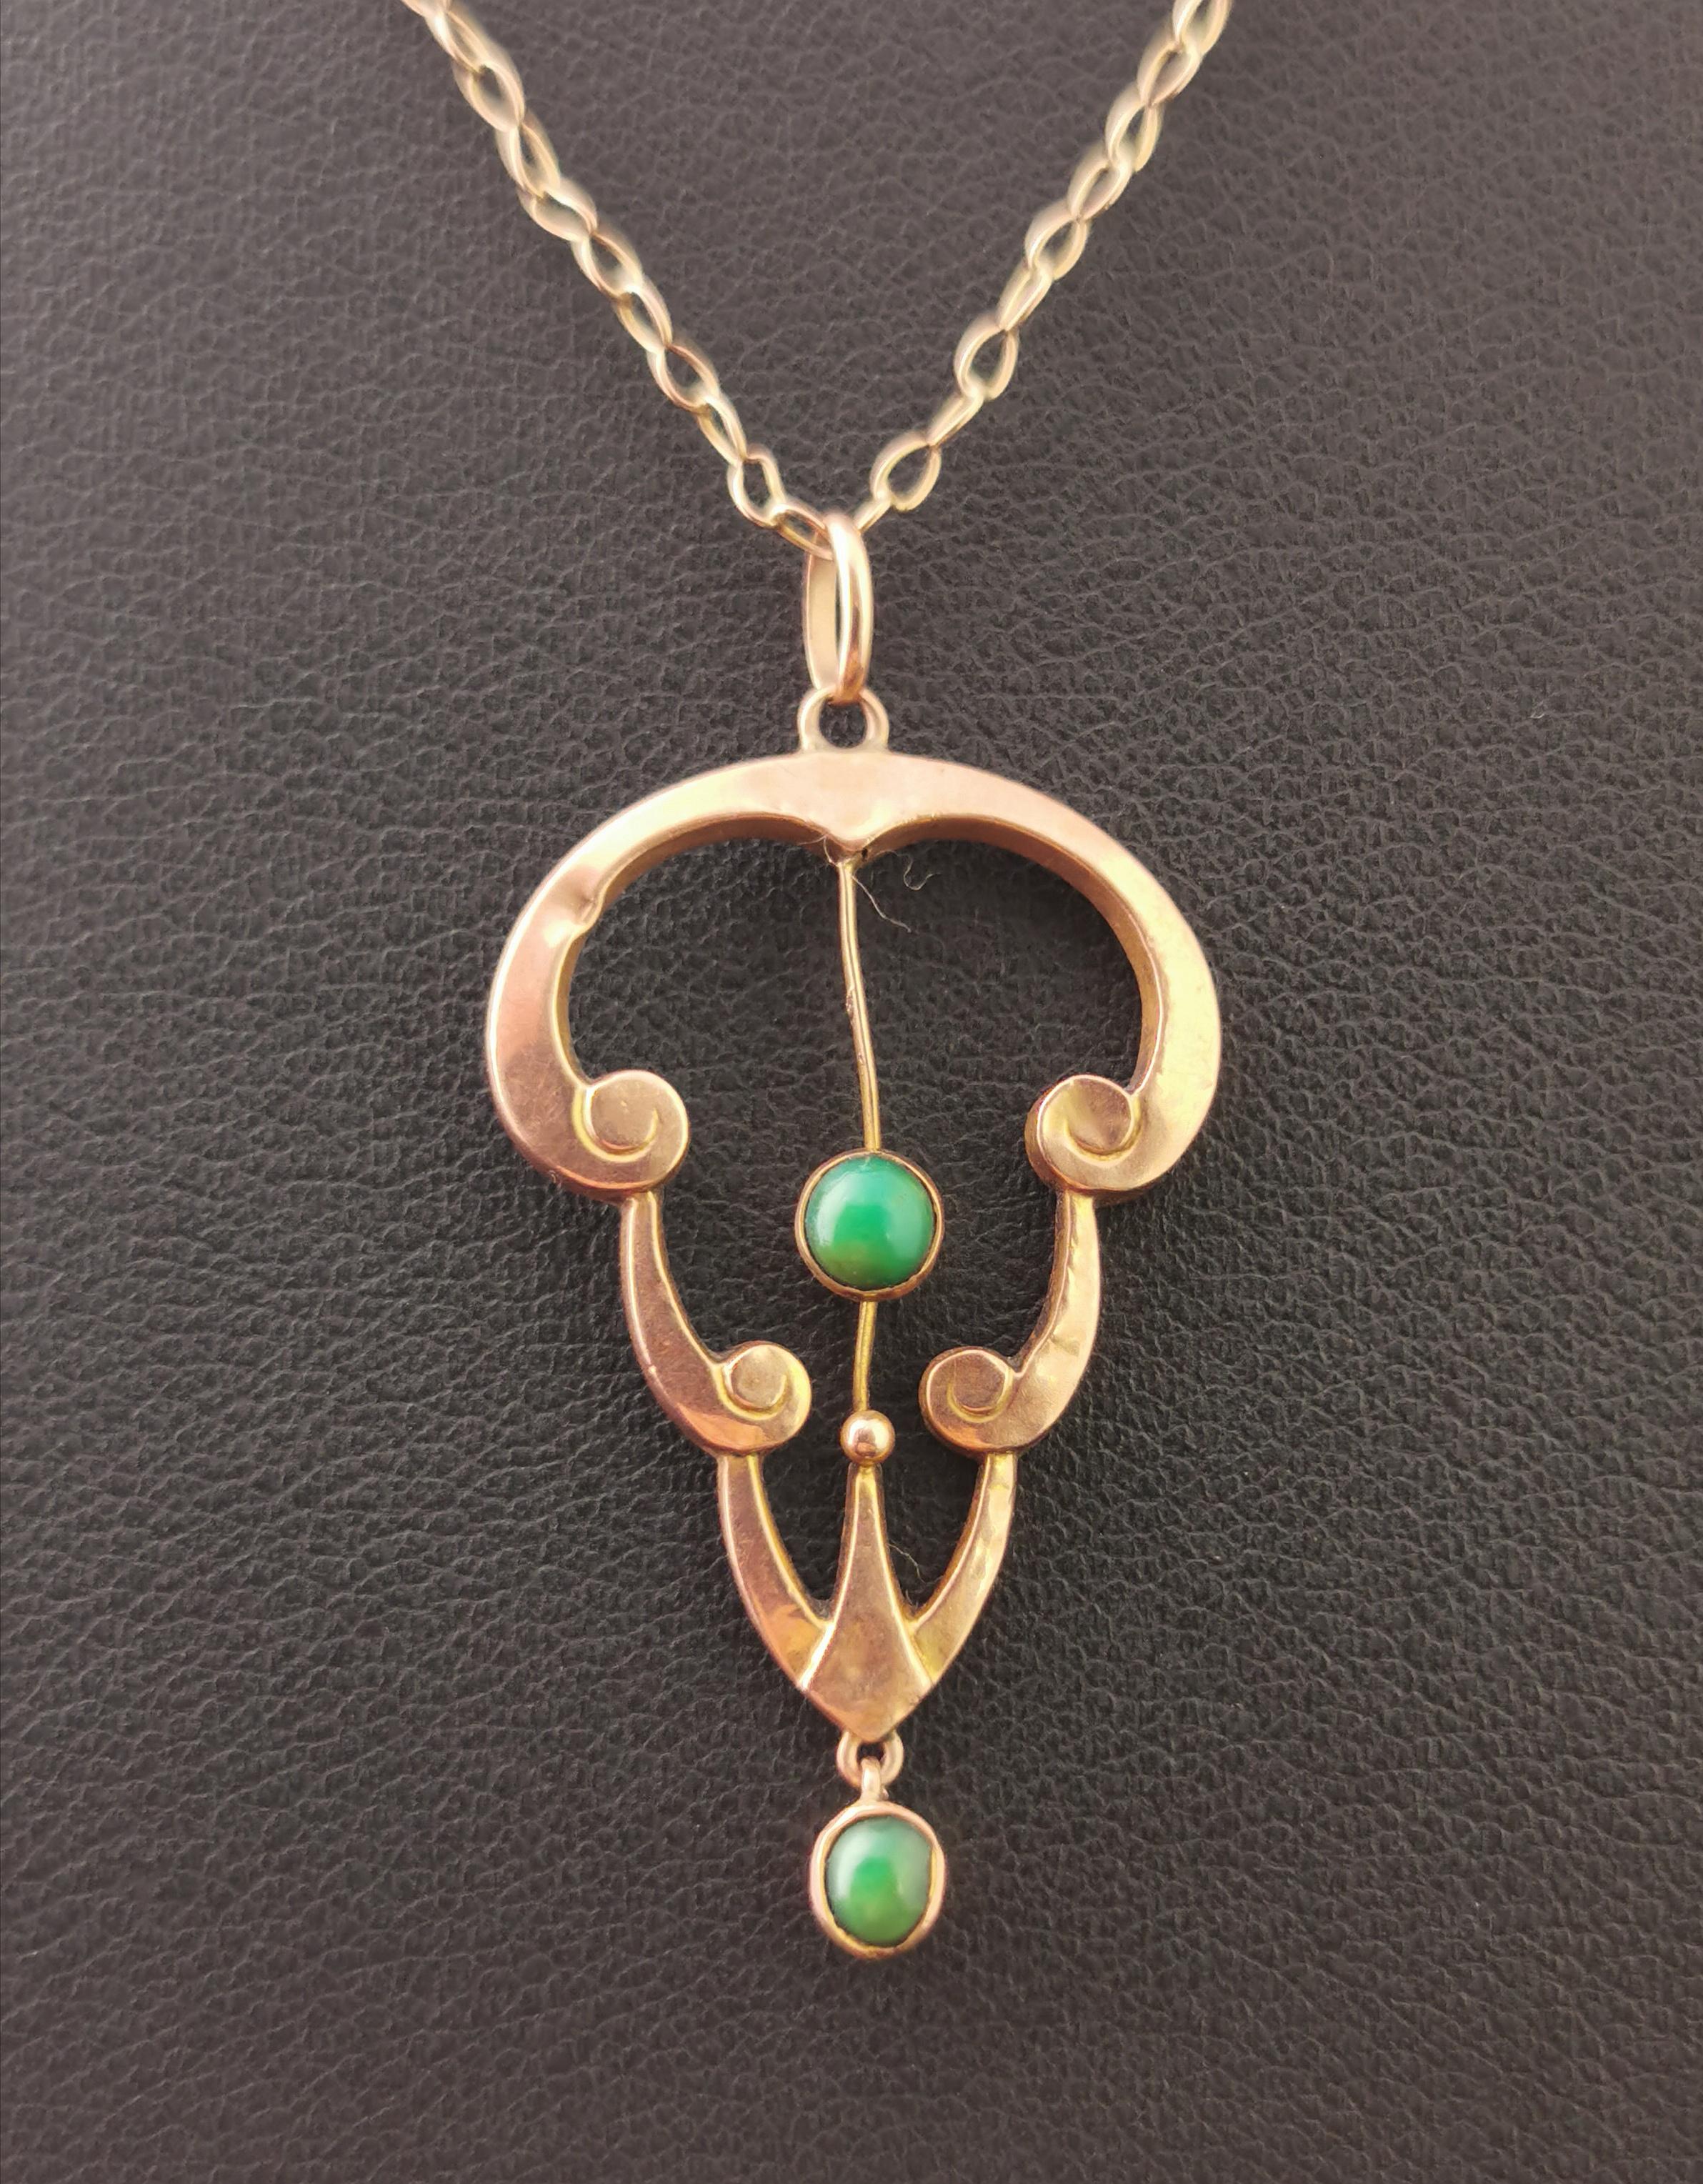 A sweet little antique, Art Nouveau era turquoise lavalier pendant.

Scrolling arches of rose gold with a vivid green turquoise cabochon set in the centre.

The bottom of the pendant has a small articulated drop set with a further turquoise